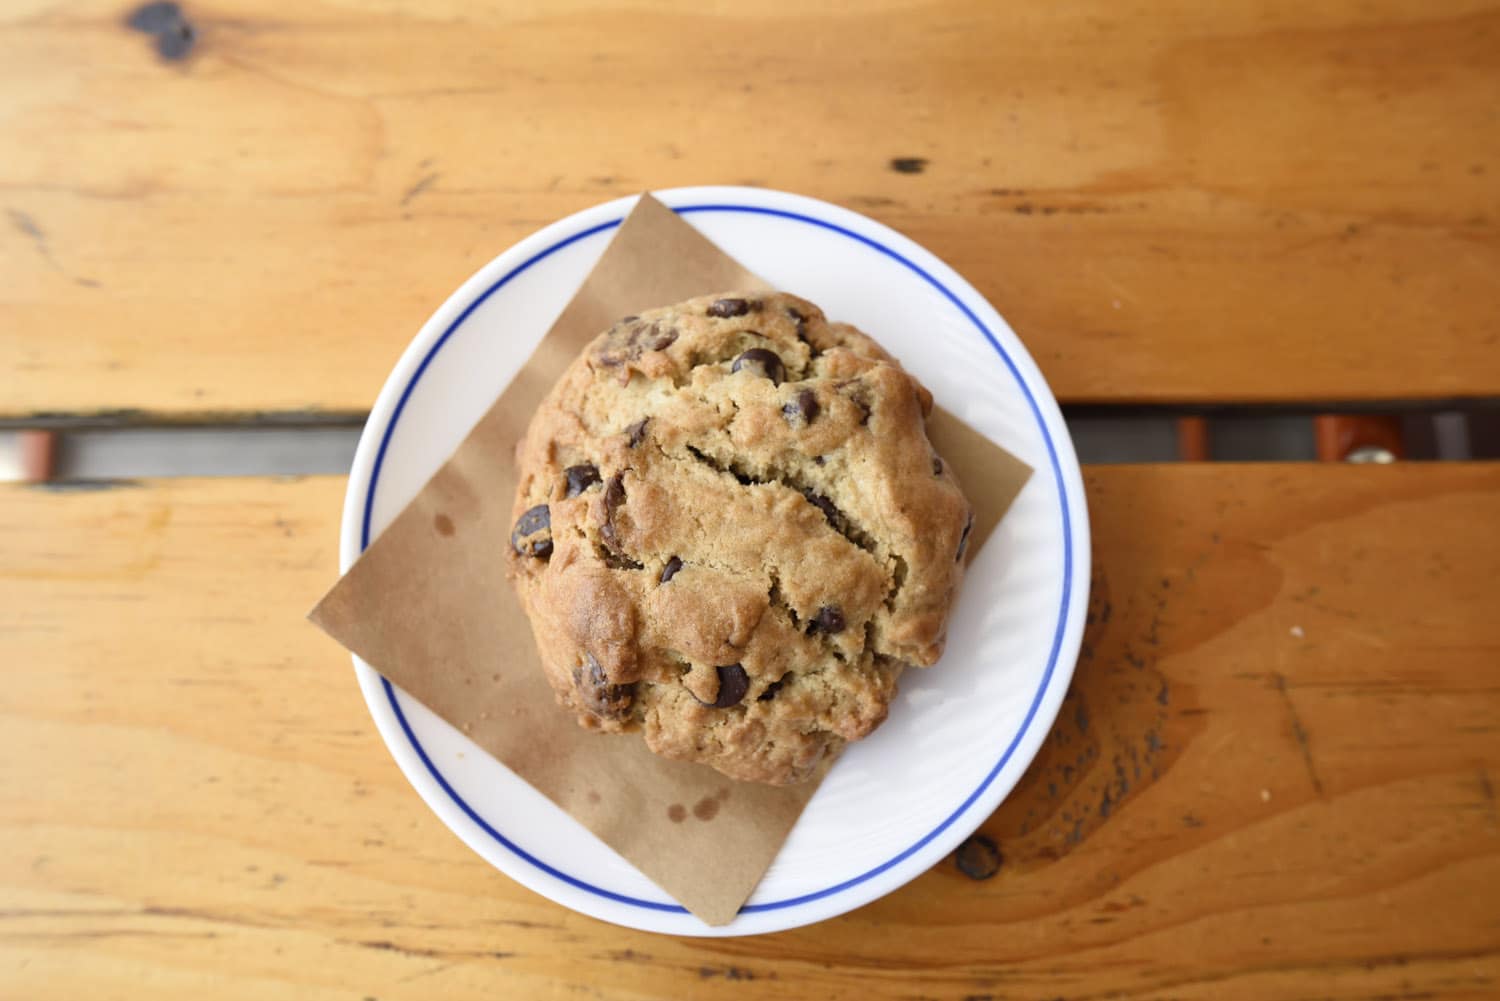  Diners can enjoy a 230 chocolate chip cookie at The Corner. Photo by Tunmise Odufuye